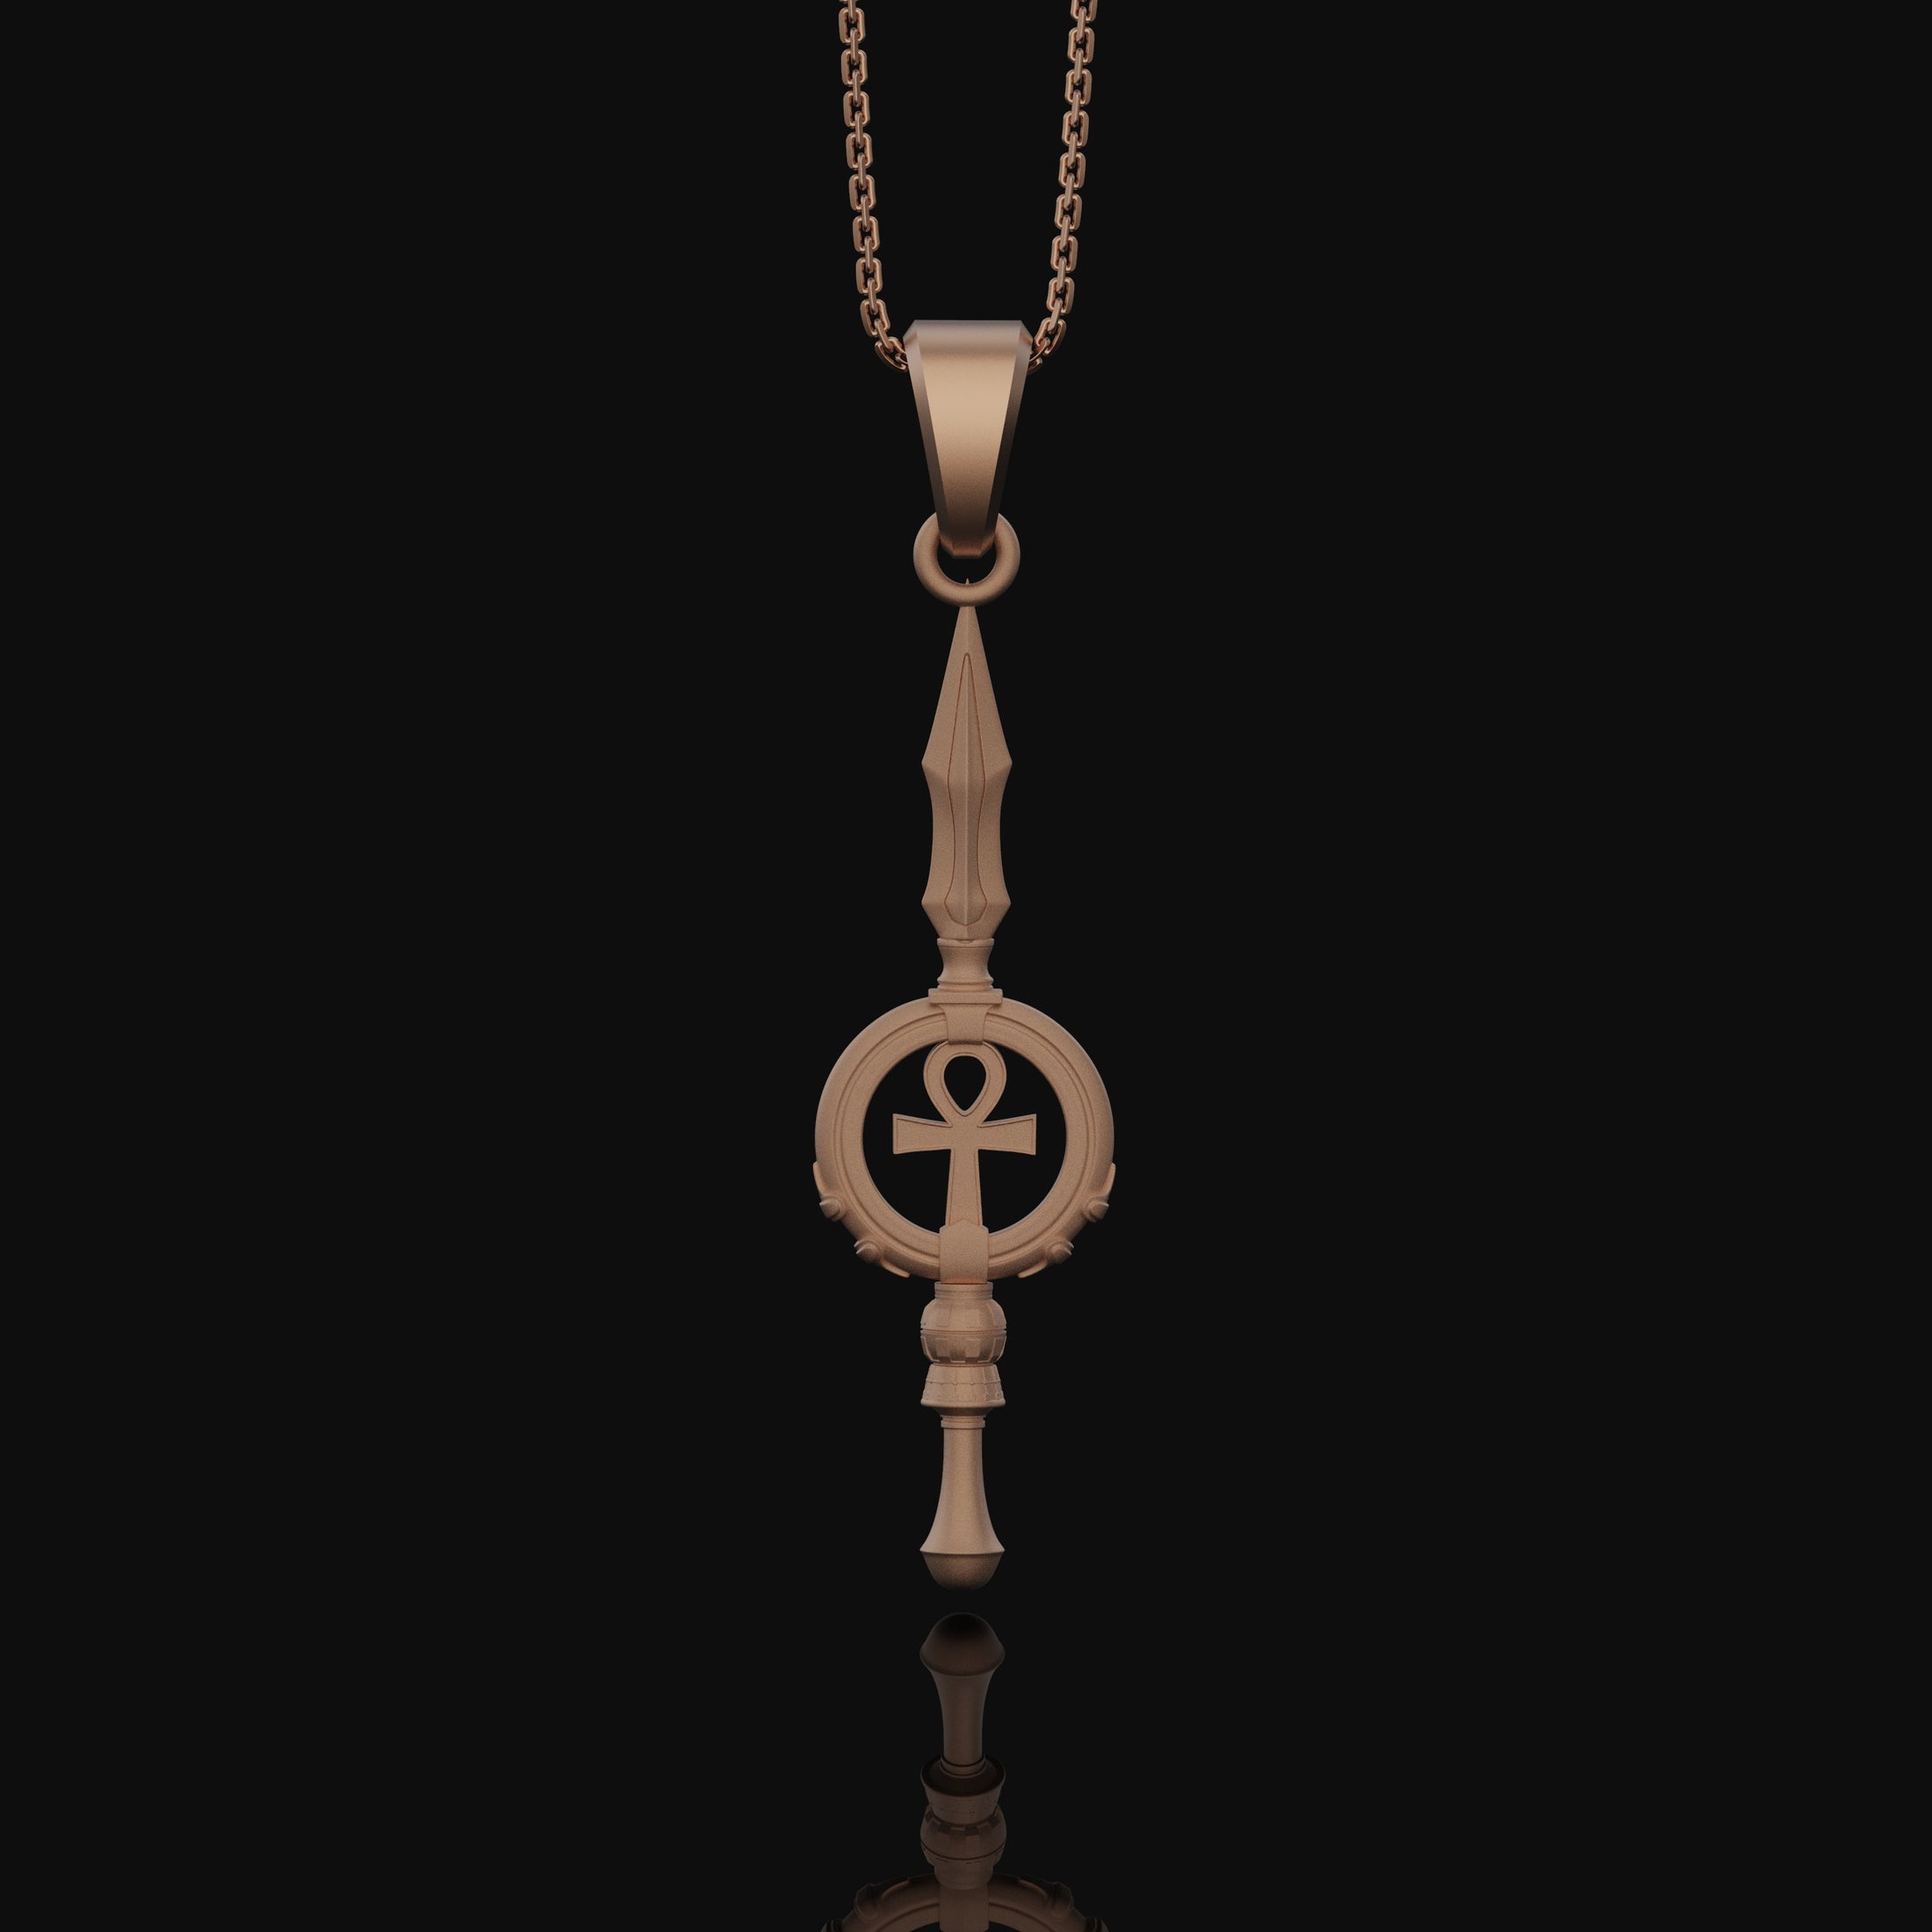 Silver Ankh Key Spear Charm Necklace - Elegant Ancient Egyptian Style, Spiritual Life Symbol, Warrior Inspired Jewelry Rose Gold Matte